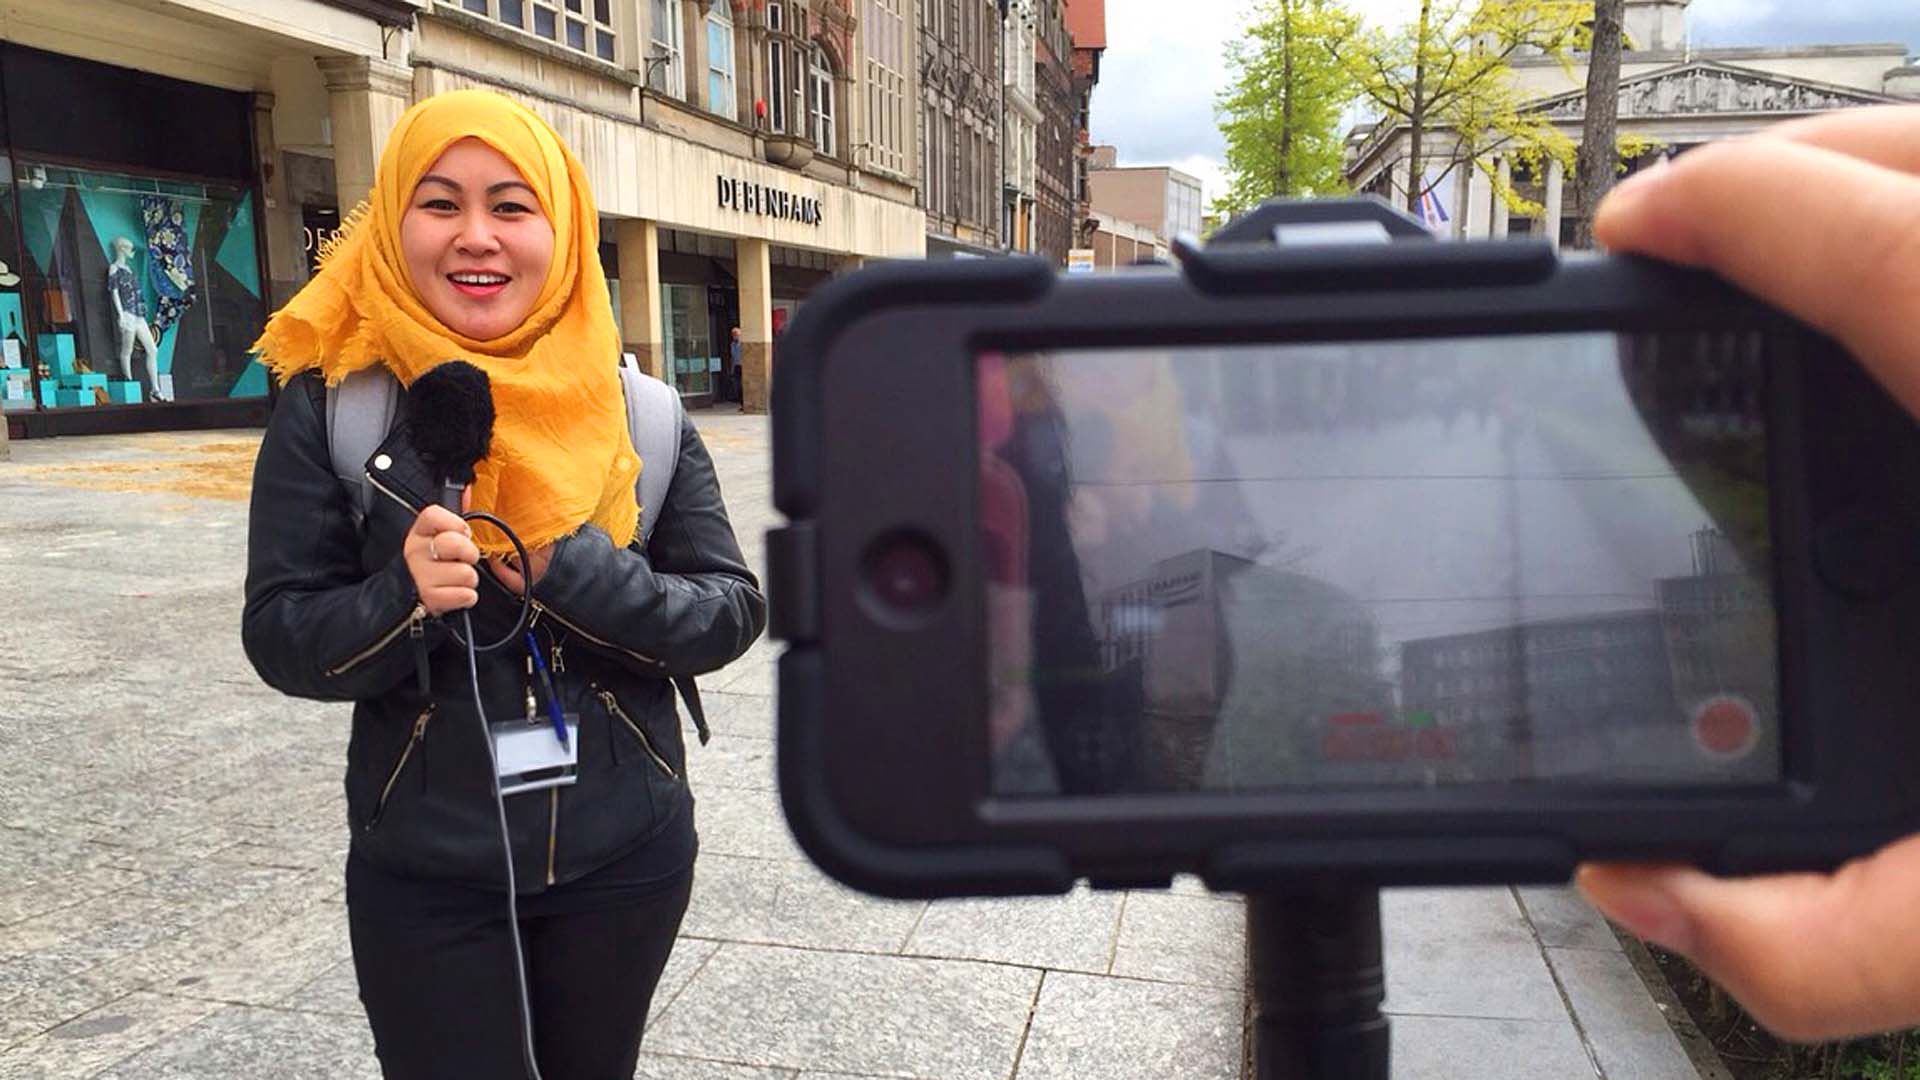 Mobile journalism was a highlight for Anas Metusin